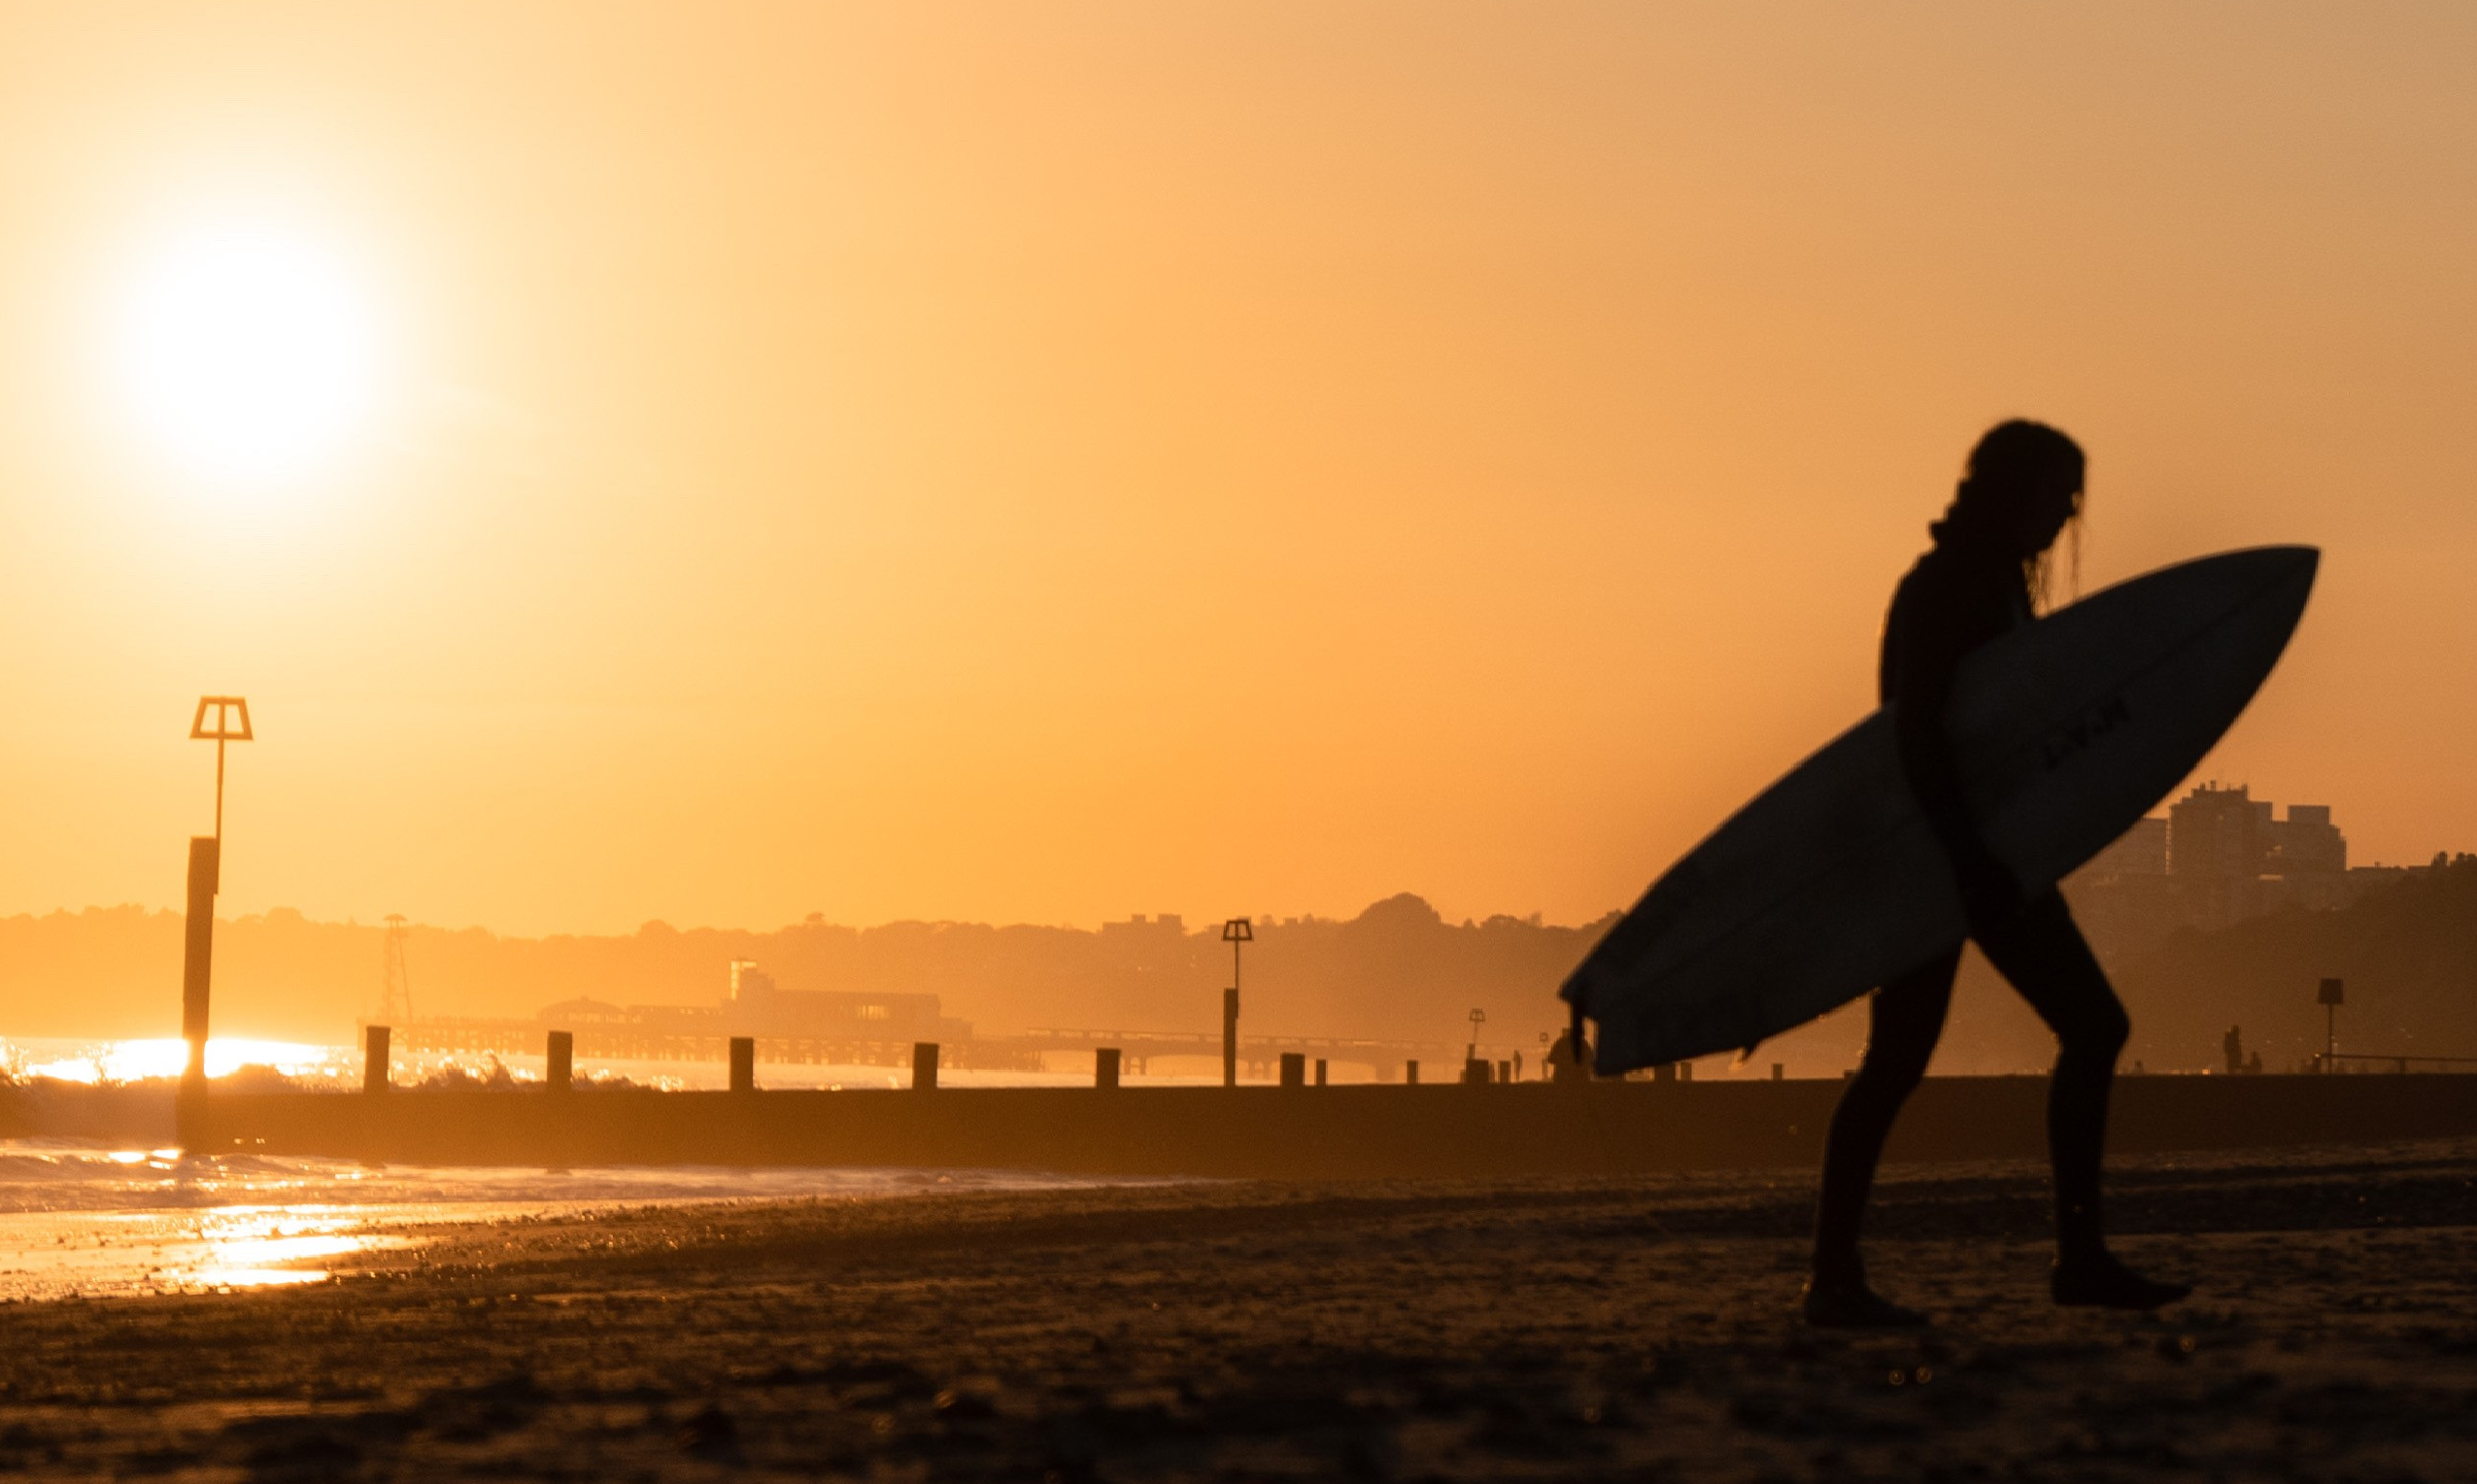 Surfing at sunset at Boscombe.